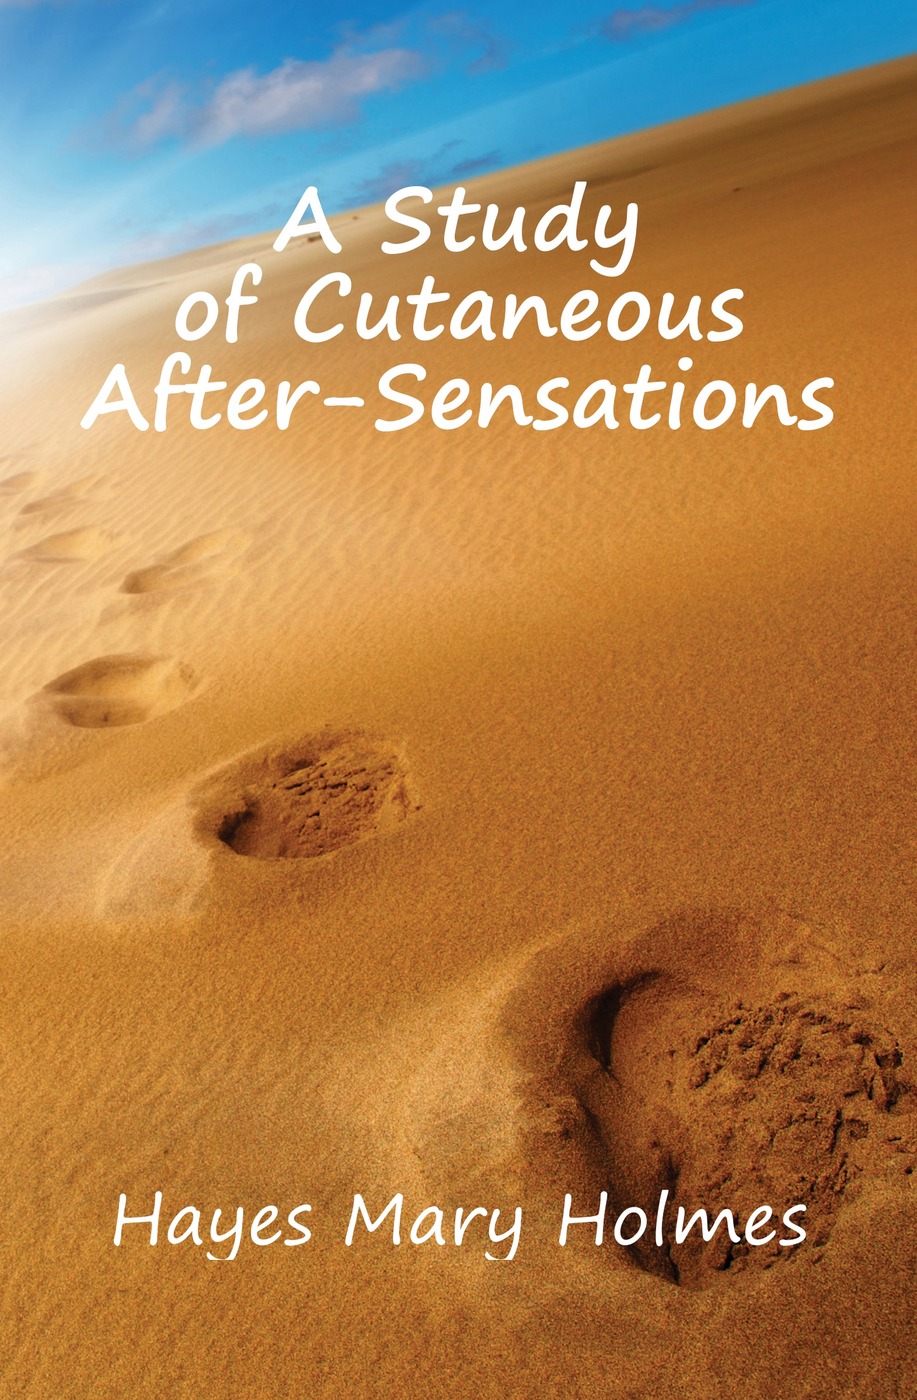 A Study of Cutaneous After-Sensations